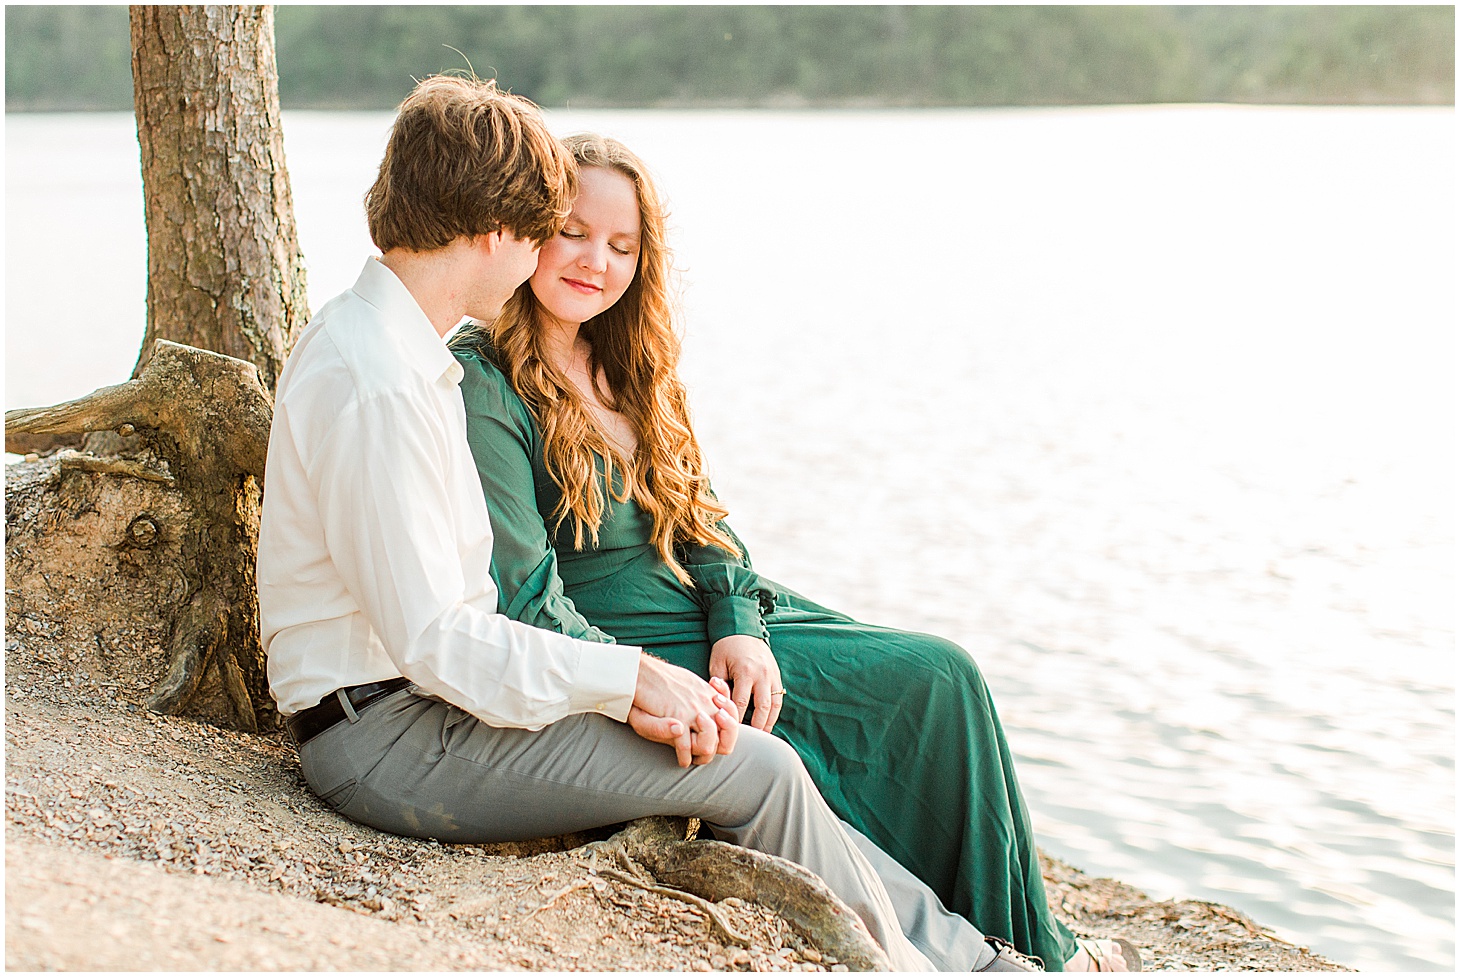 carvinscoveengagementsession_roanokeengagementsession_carvinscove_virginiawedding_virginiaweddingphotographer_vaweddingphotographer_photo_0045.jpg